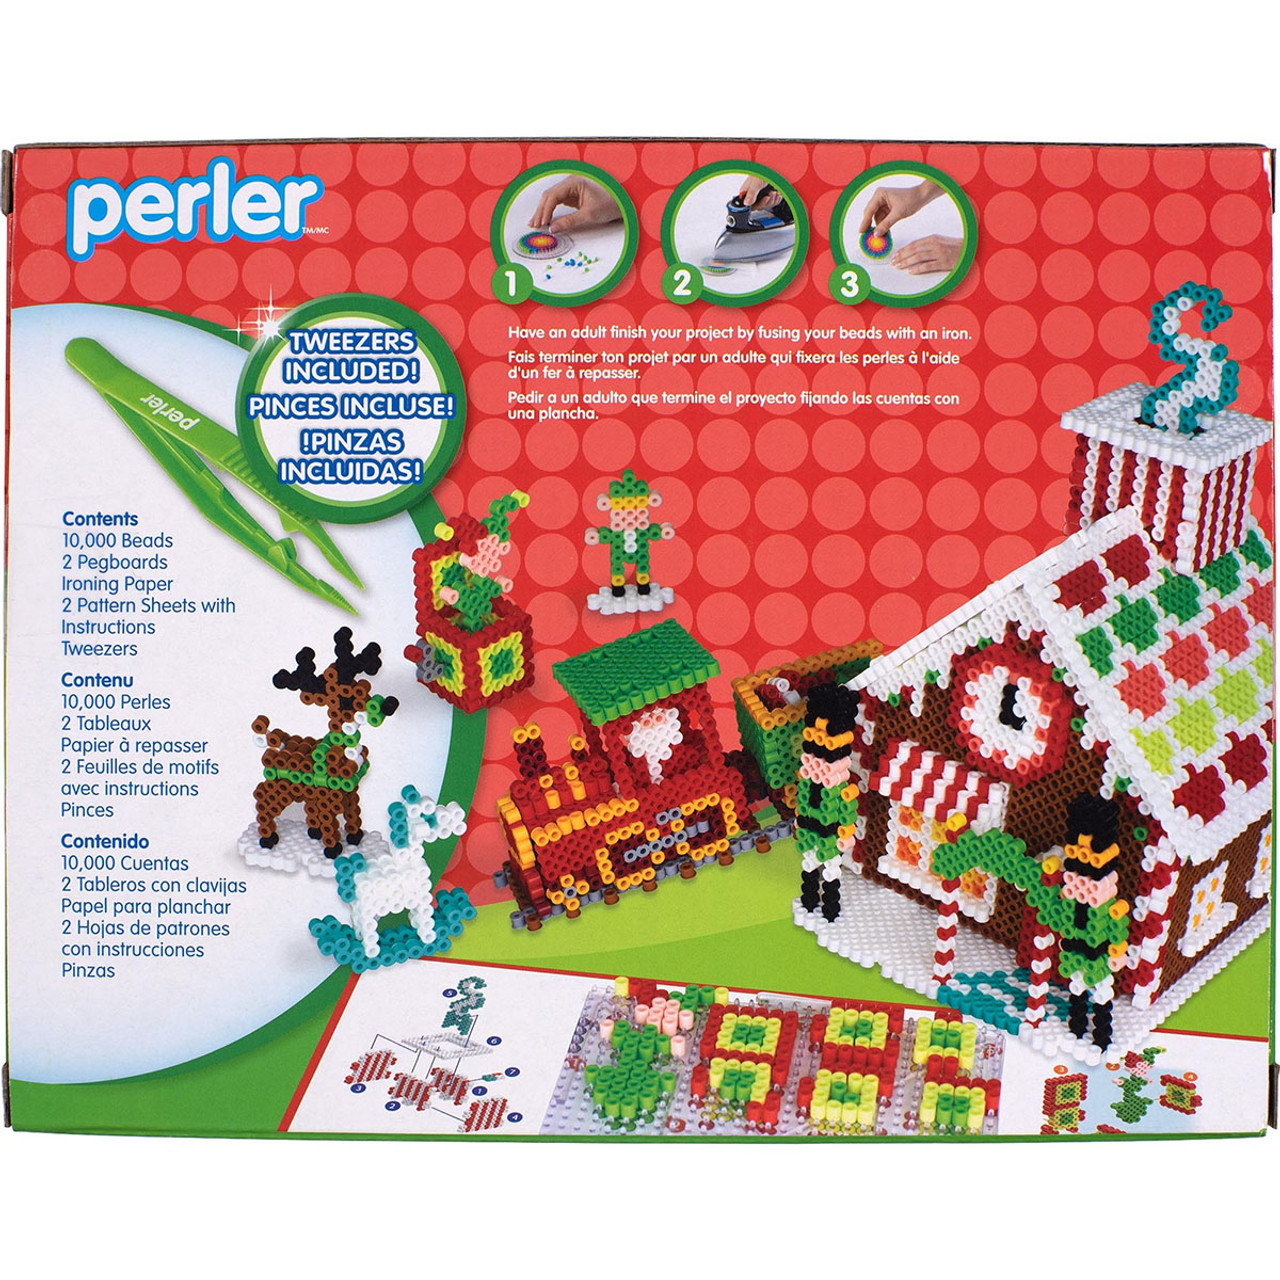 Perler Fused Bead Kit-3D Ice Palace Gingerbread